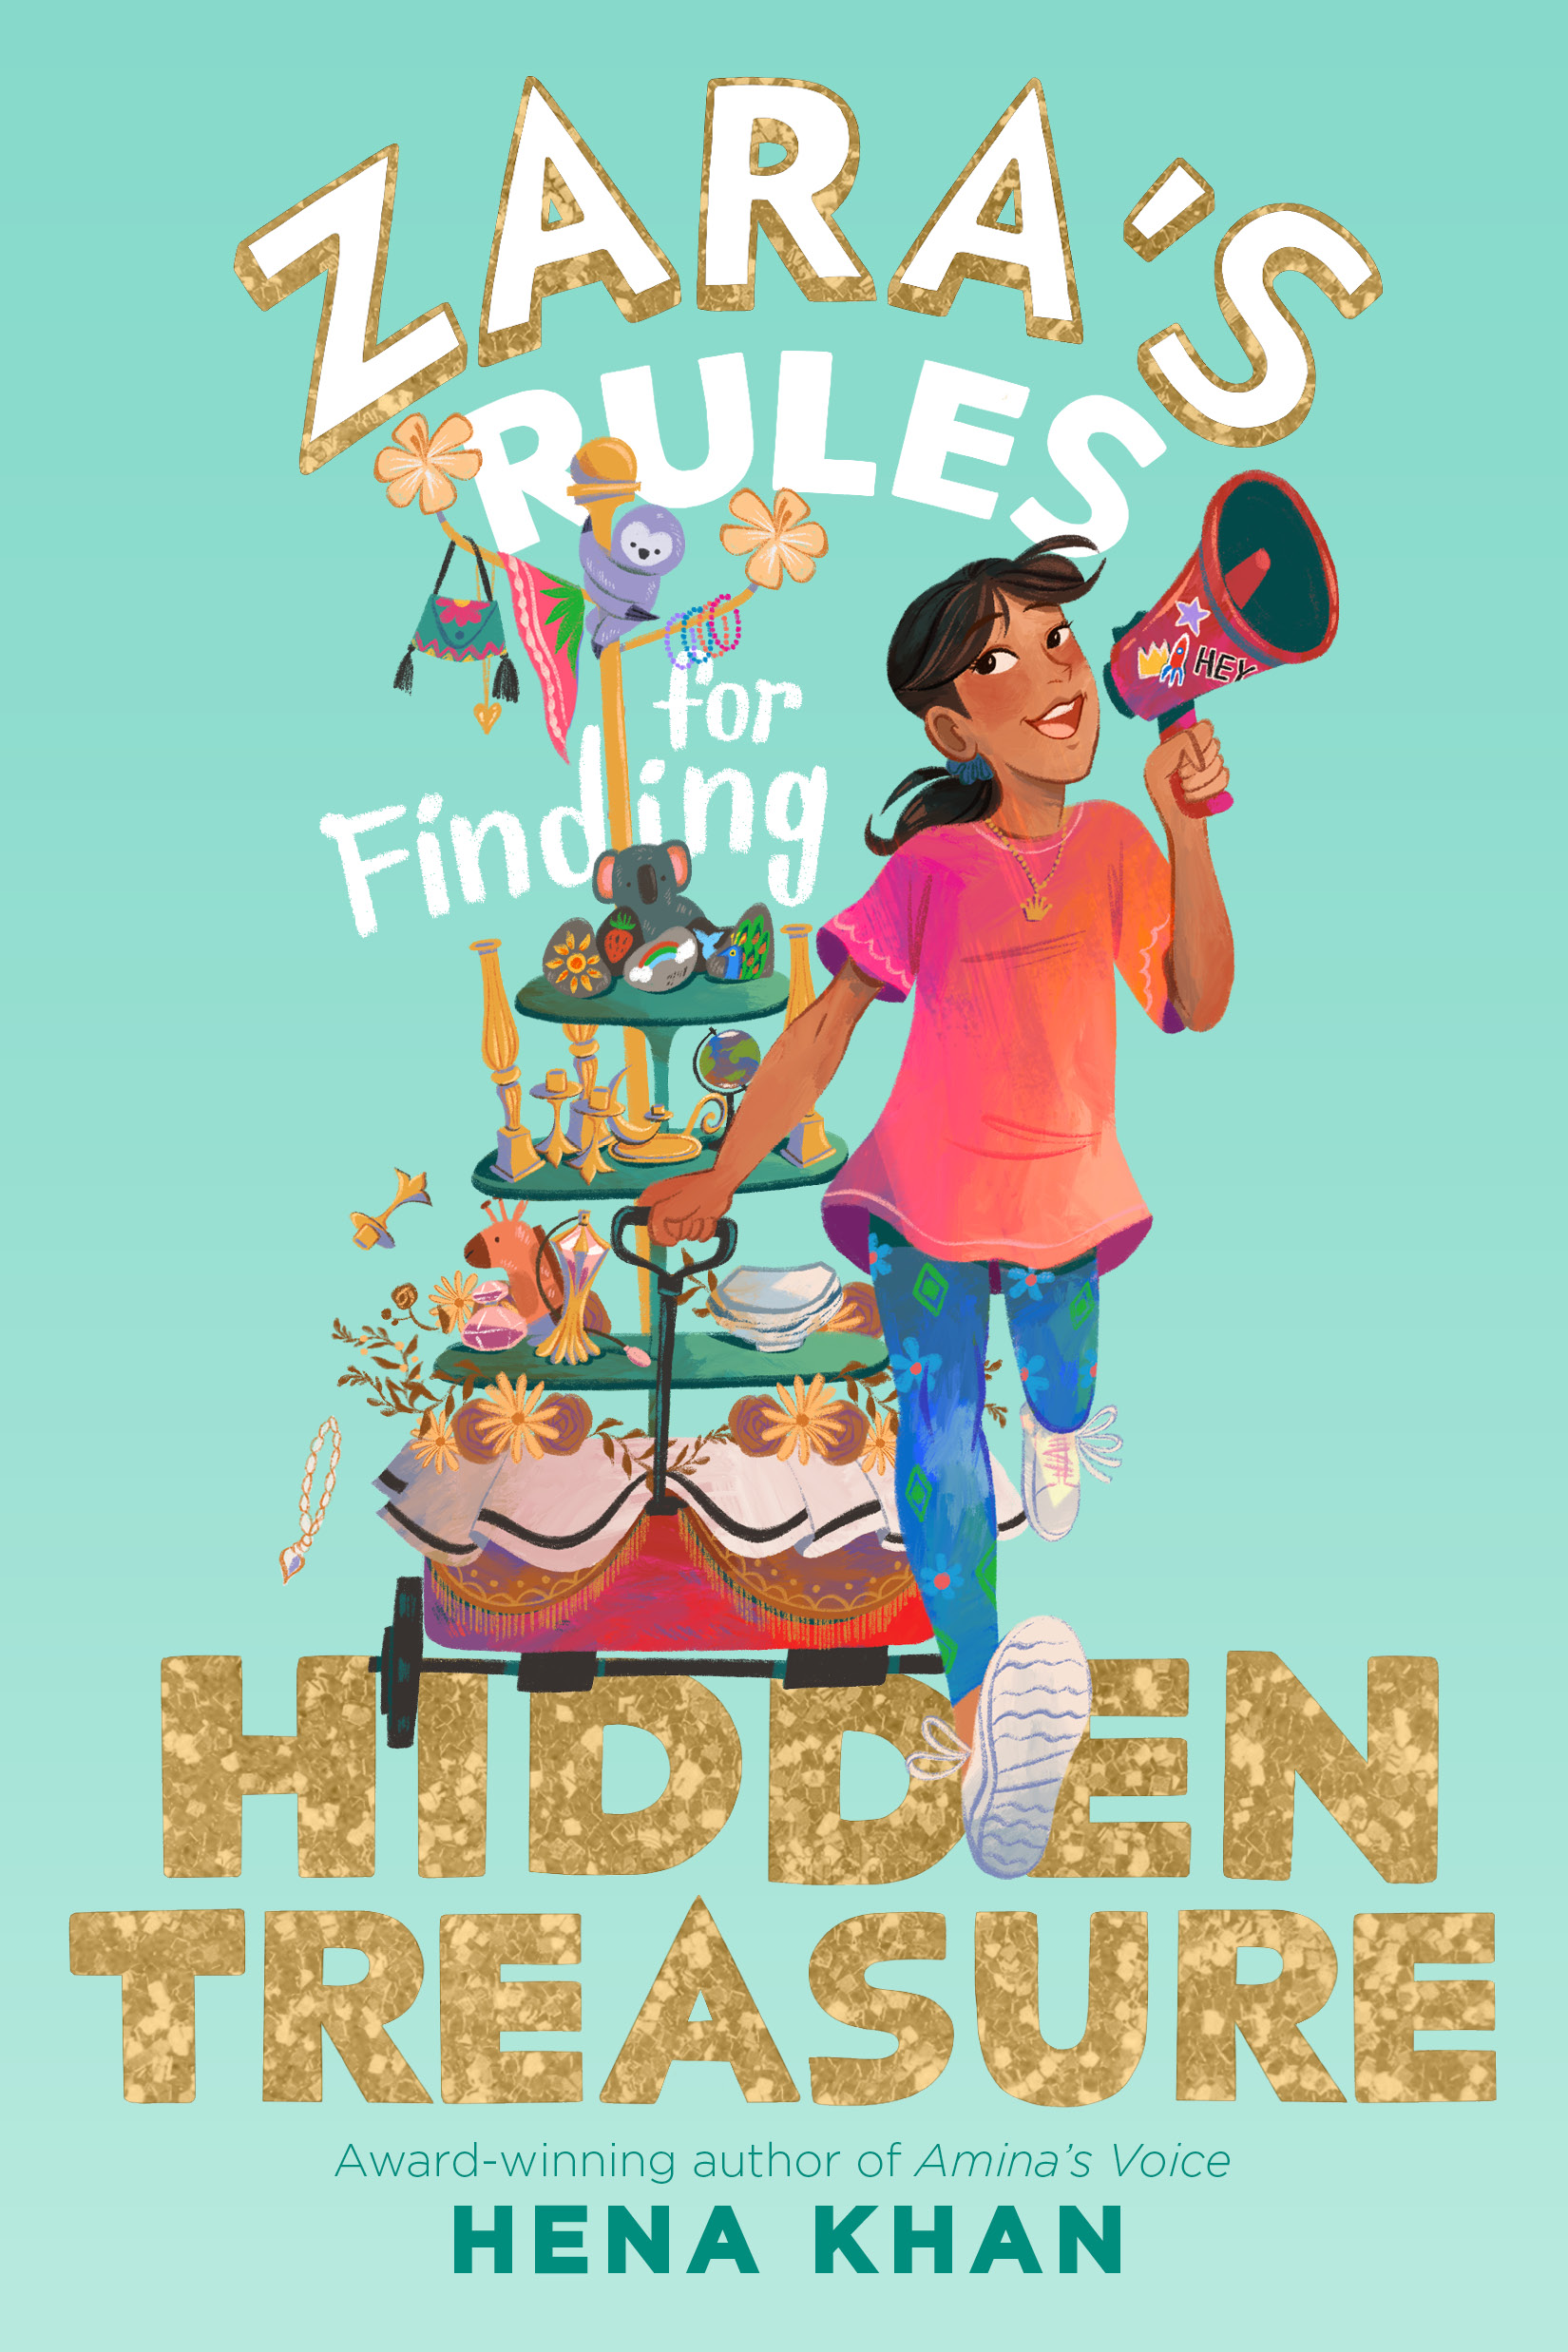 Author Chat With Hena Khan ( ZARA’S RULES FOR FINDING HIDDEN TREASURE), Plus Giveaway! ~US ONLY